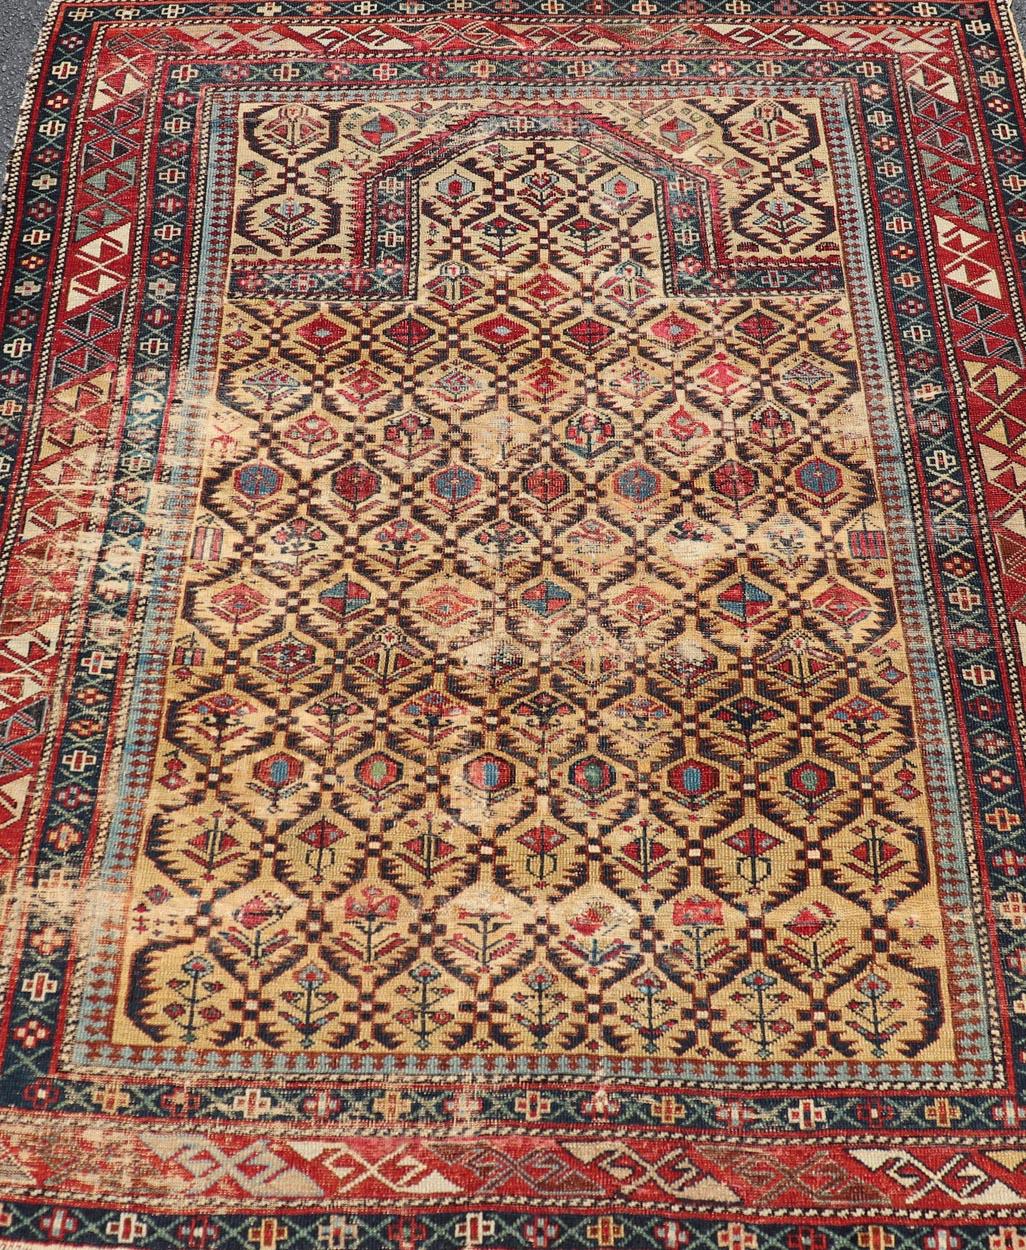 Antique Shirvan Prayer Rug with All-Over Floral Design and Geometric Borders. Keivan Woven Arts / rug X23-0404-251 / early 20th century. 
Measures: 3'9 x 4'8 
This colorful floral-design antique Caucasian Shirvan prayer rug from the late 19th